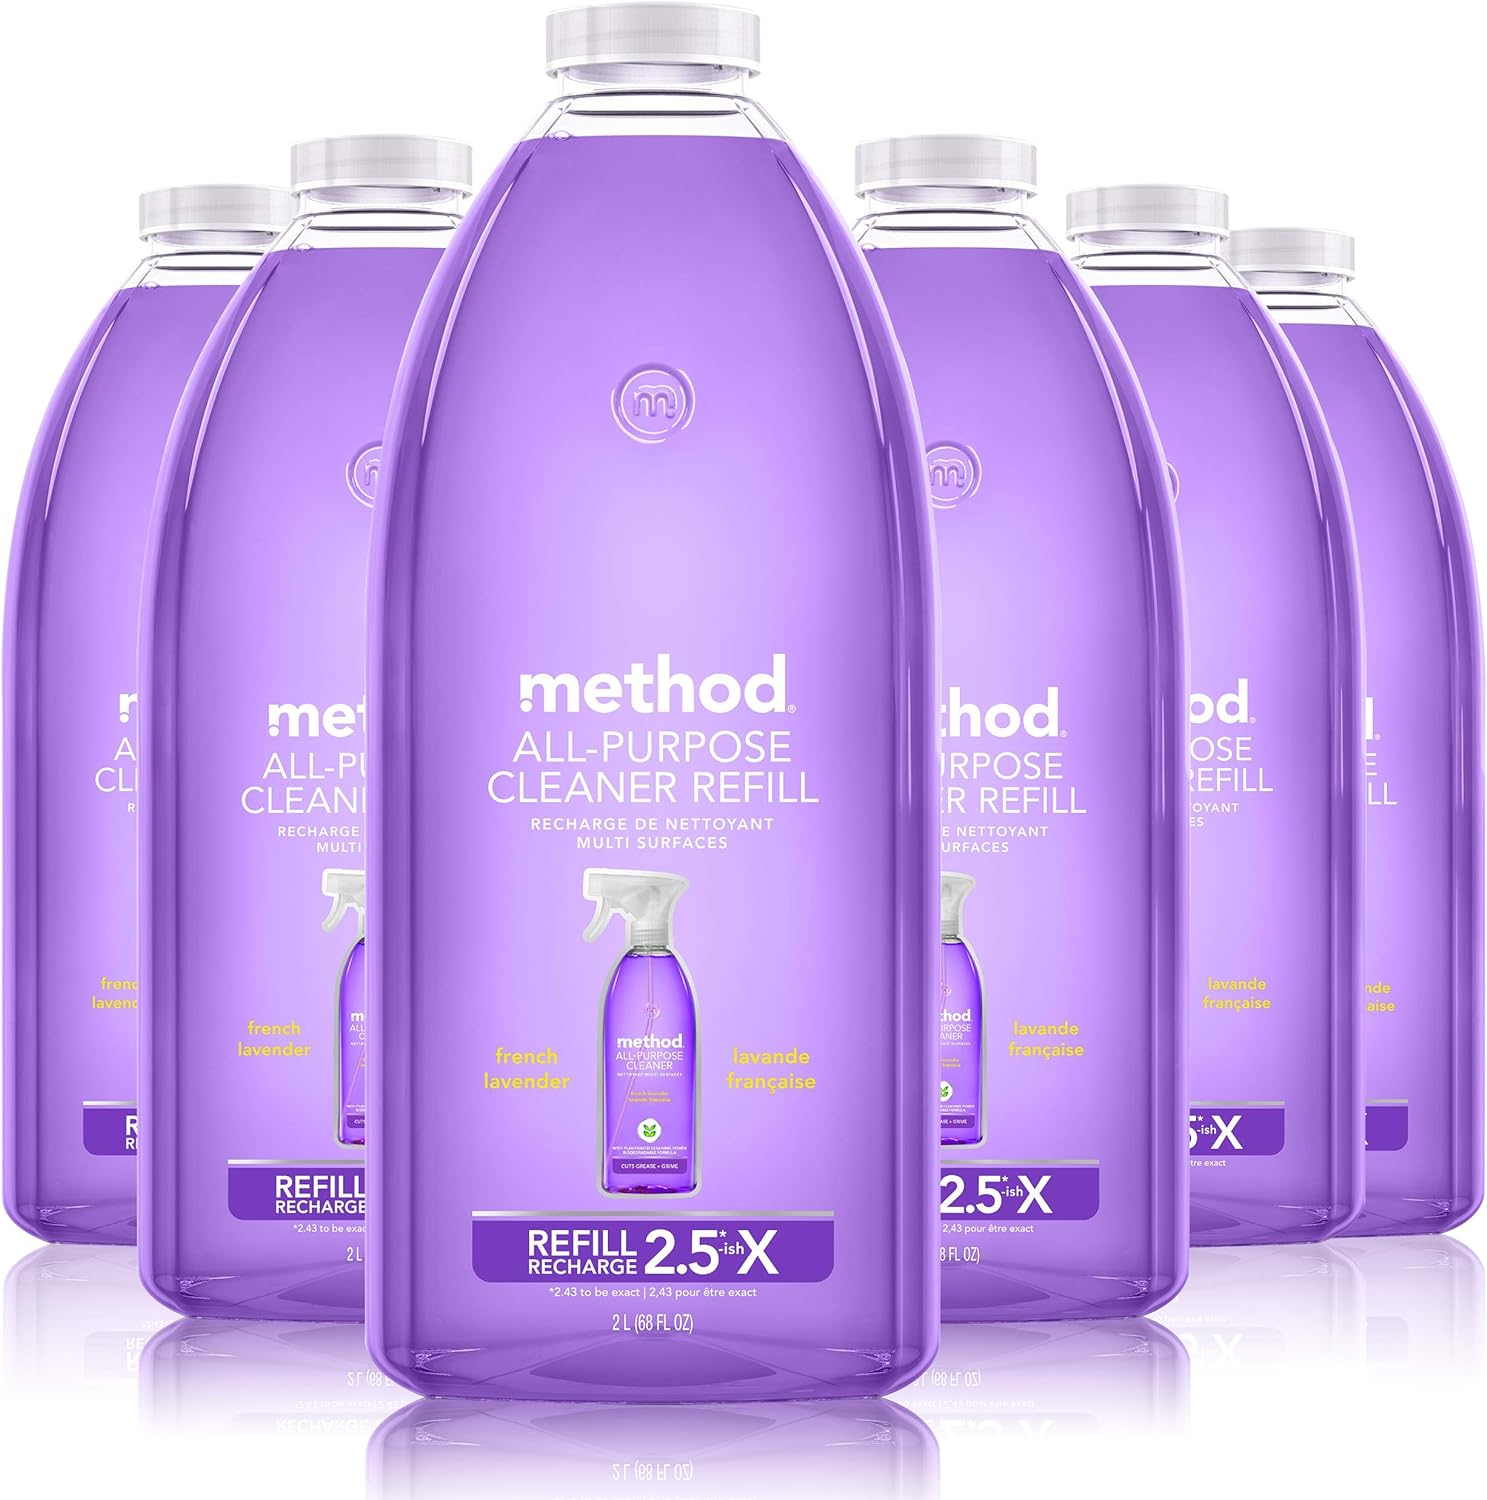 Method All-Purpose Cleaner Refill, French Lavender, Plant-Based and Biodegradable Formula Perfect for Most Counters, Tiles, Stone, and More, 68 Fl Oz bottles, (Pack of 6)